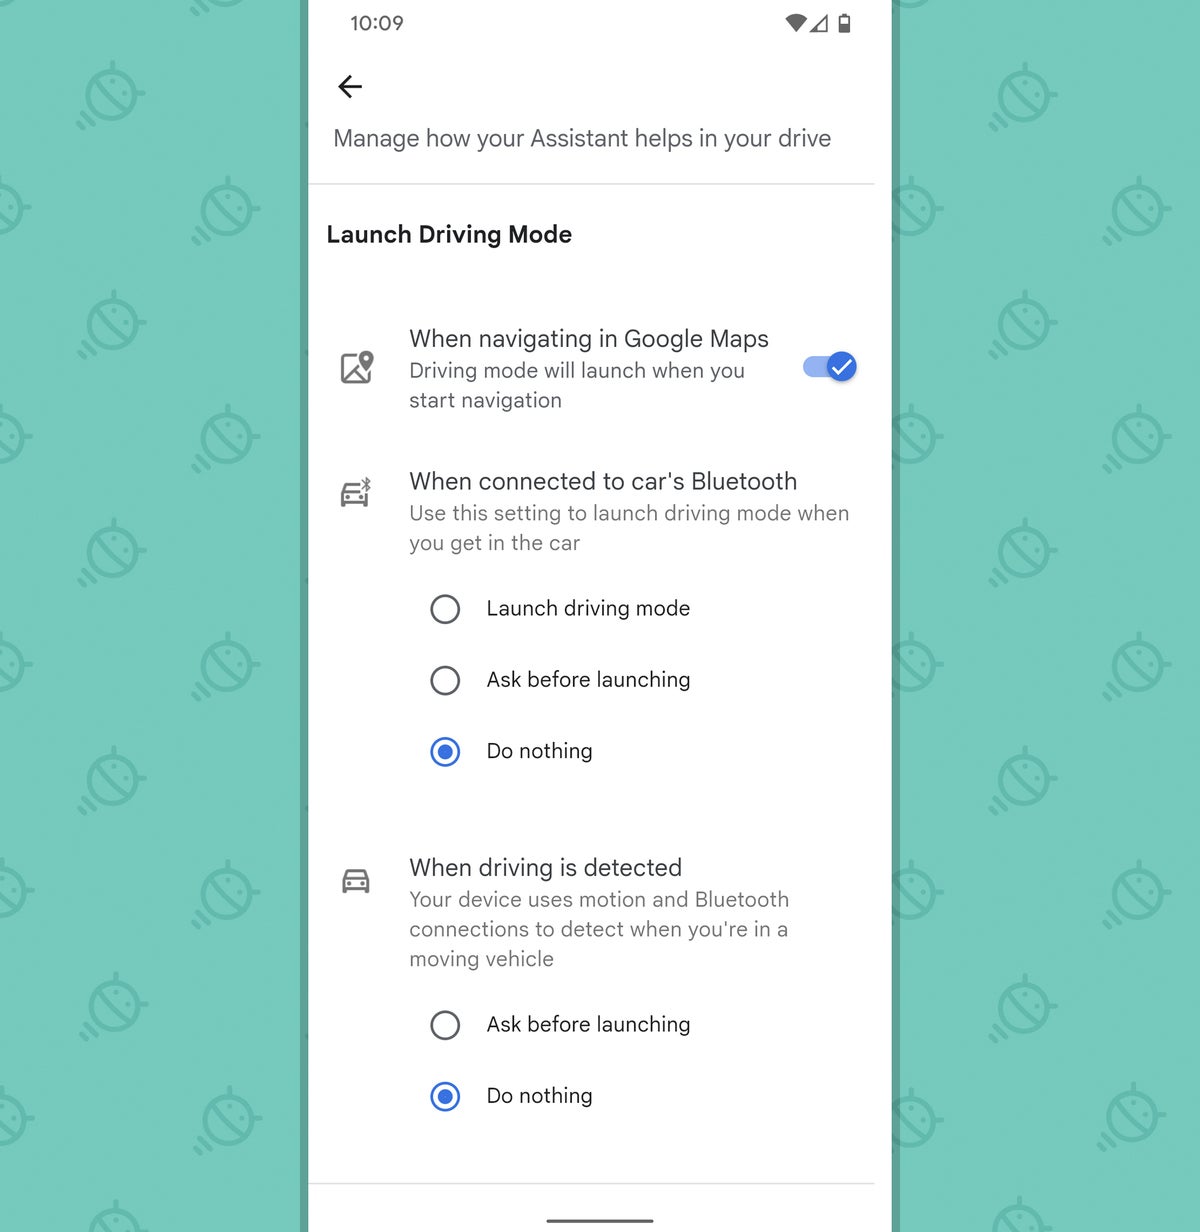 How do you move apps to Google Drive on Android? - AST